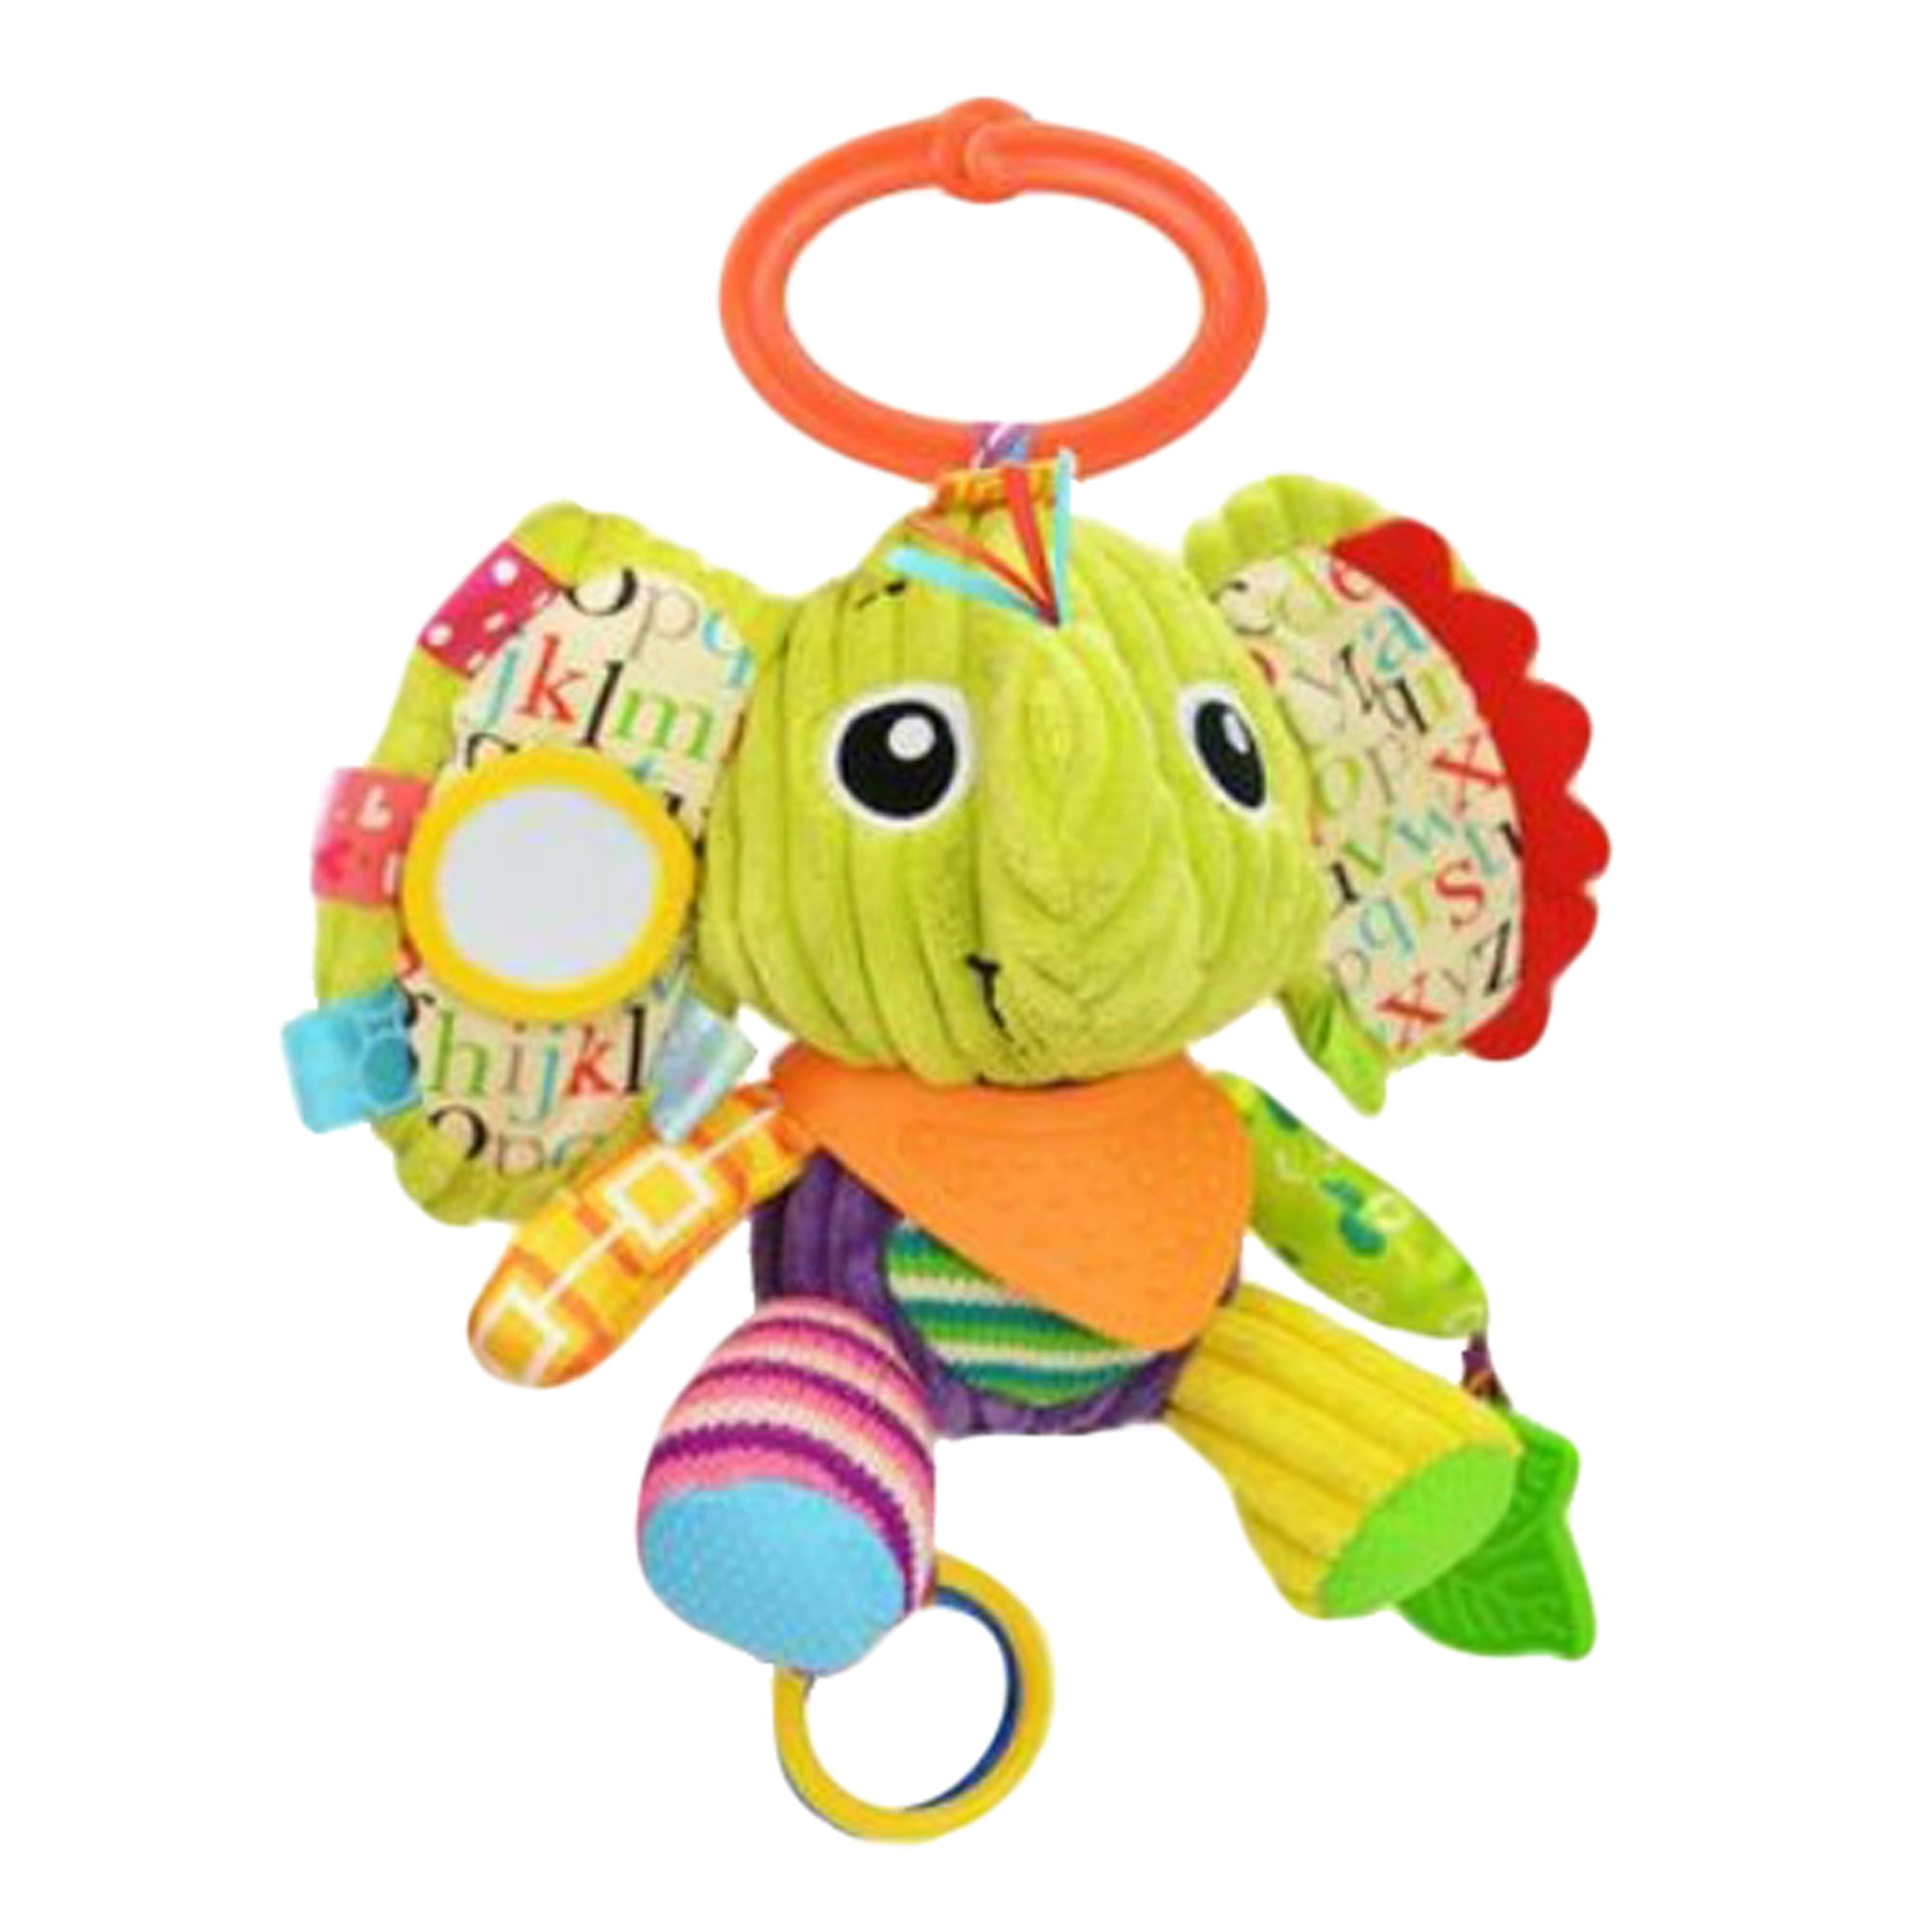 Toddlers for Babies Baby Soft Rattle Ball Plush Stuffed Animal Multi Sensory Toy Green Frog Infants Baby Sensory Ball with Chiming Bell 